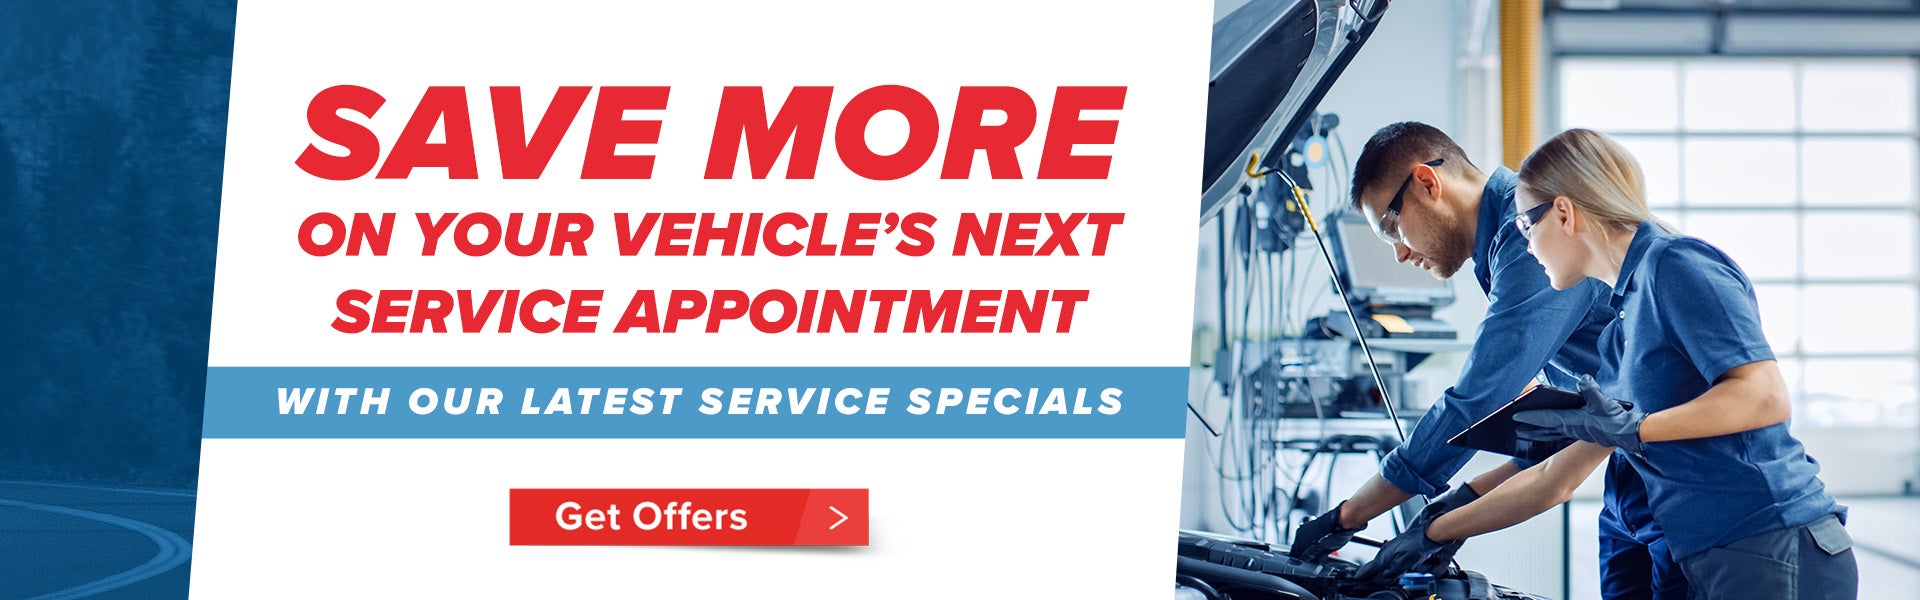 Save More With Our Latest Service Specials